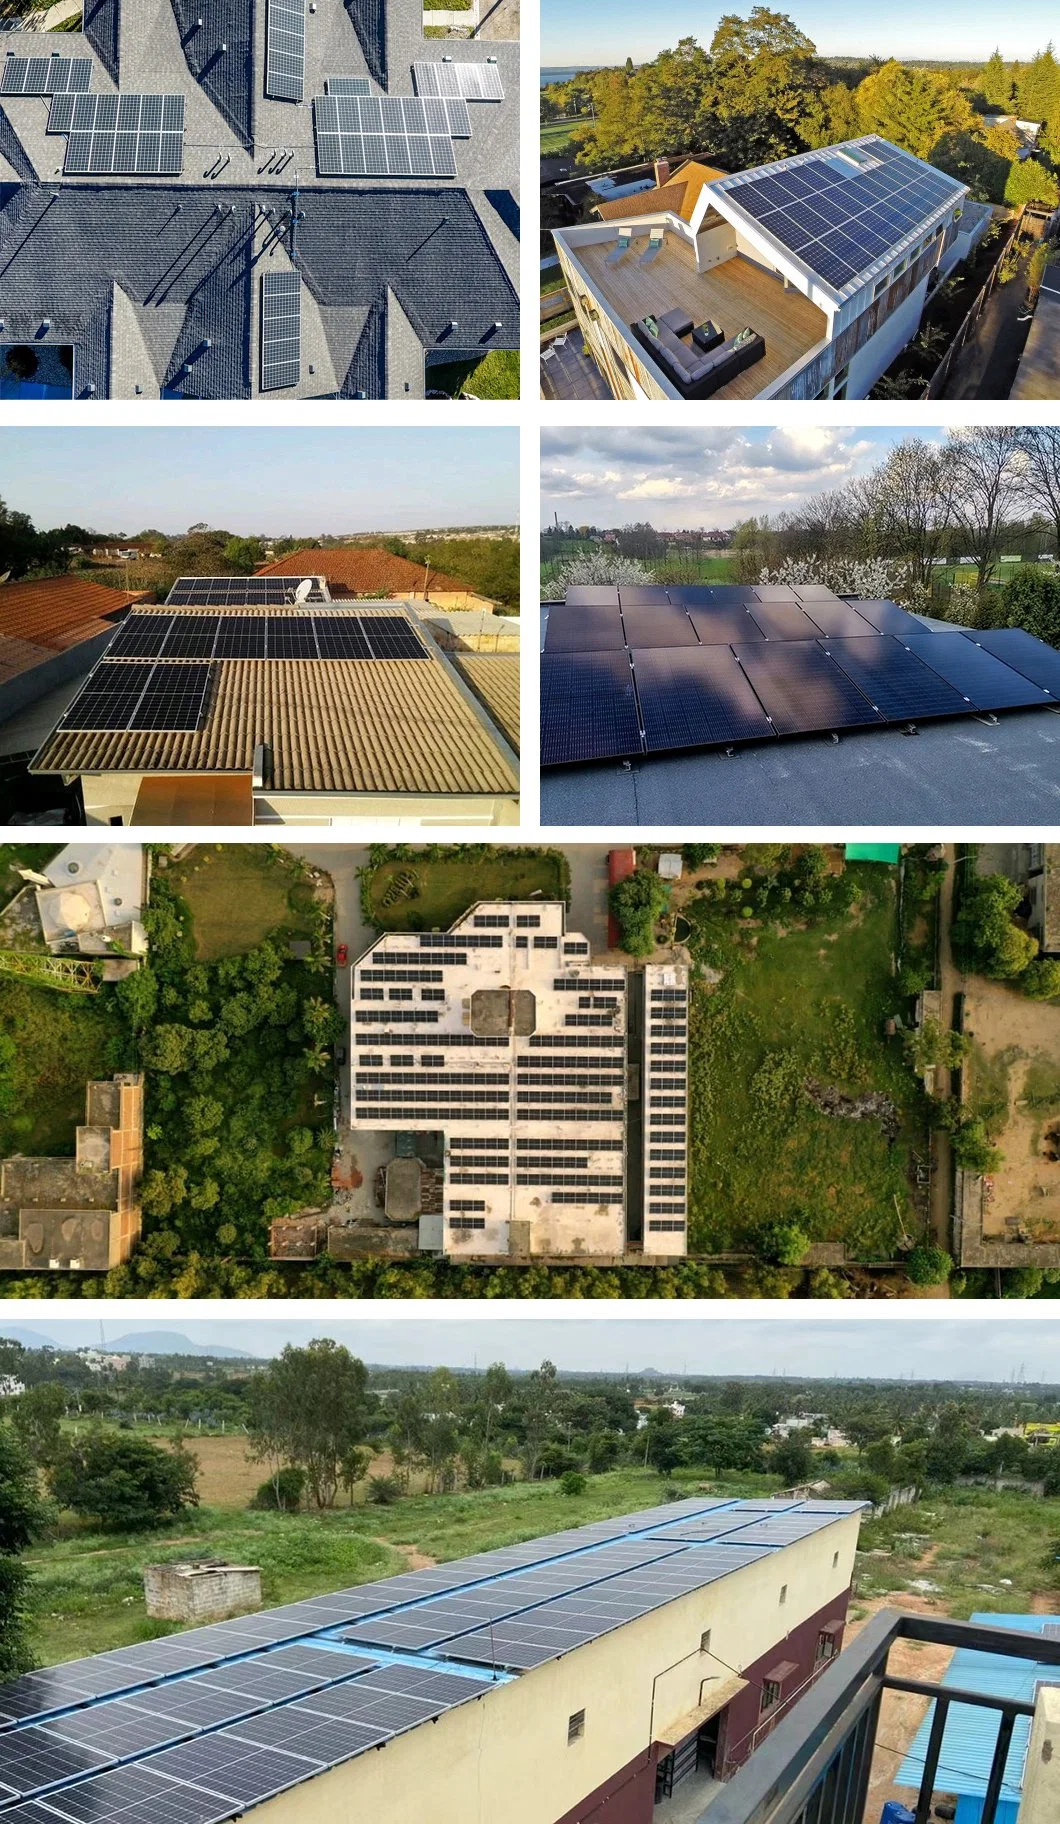 Completed 3kw 5kw Solar Power System for Home 4kw 5 Kilowatts on Grid Solar Power Panel Installation Cost